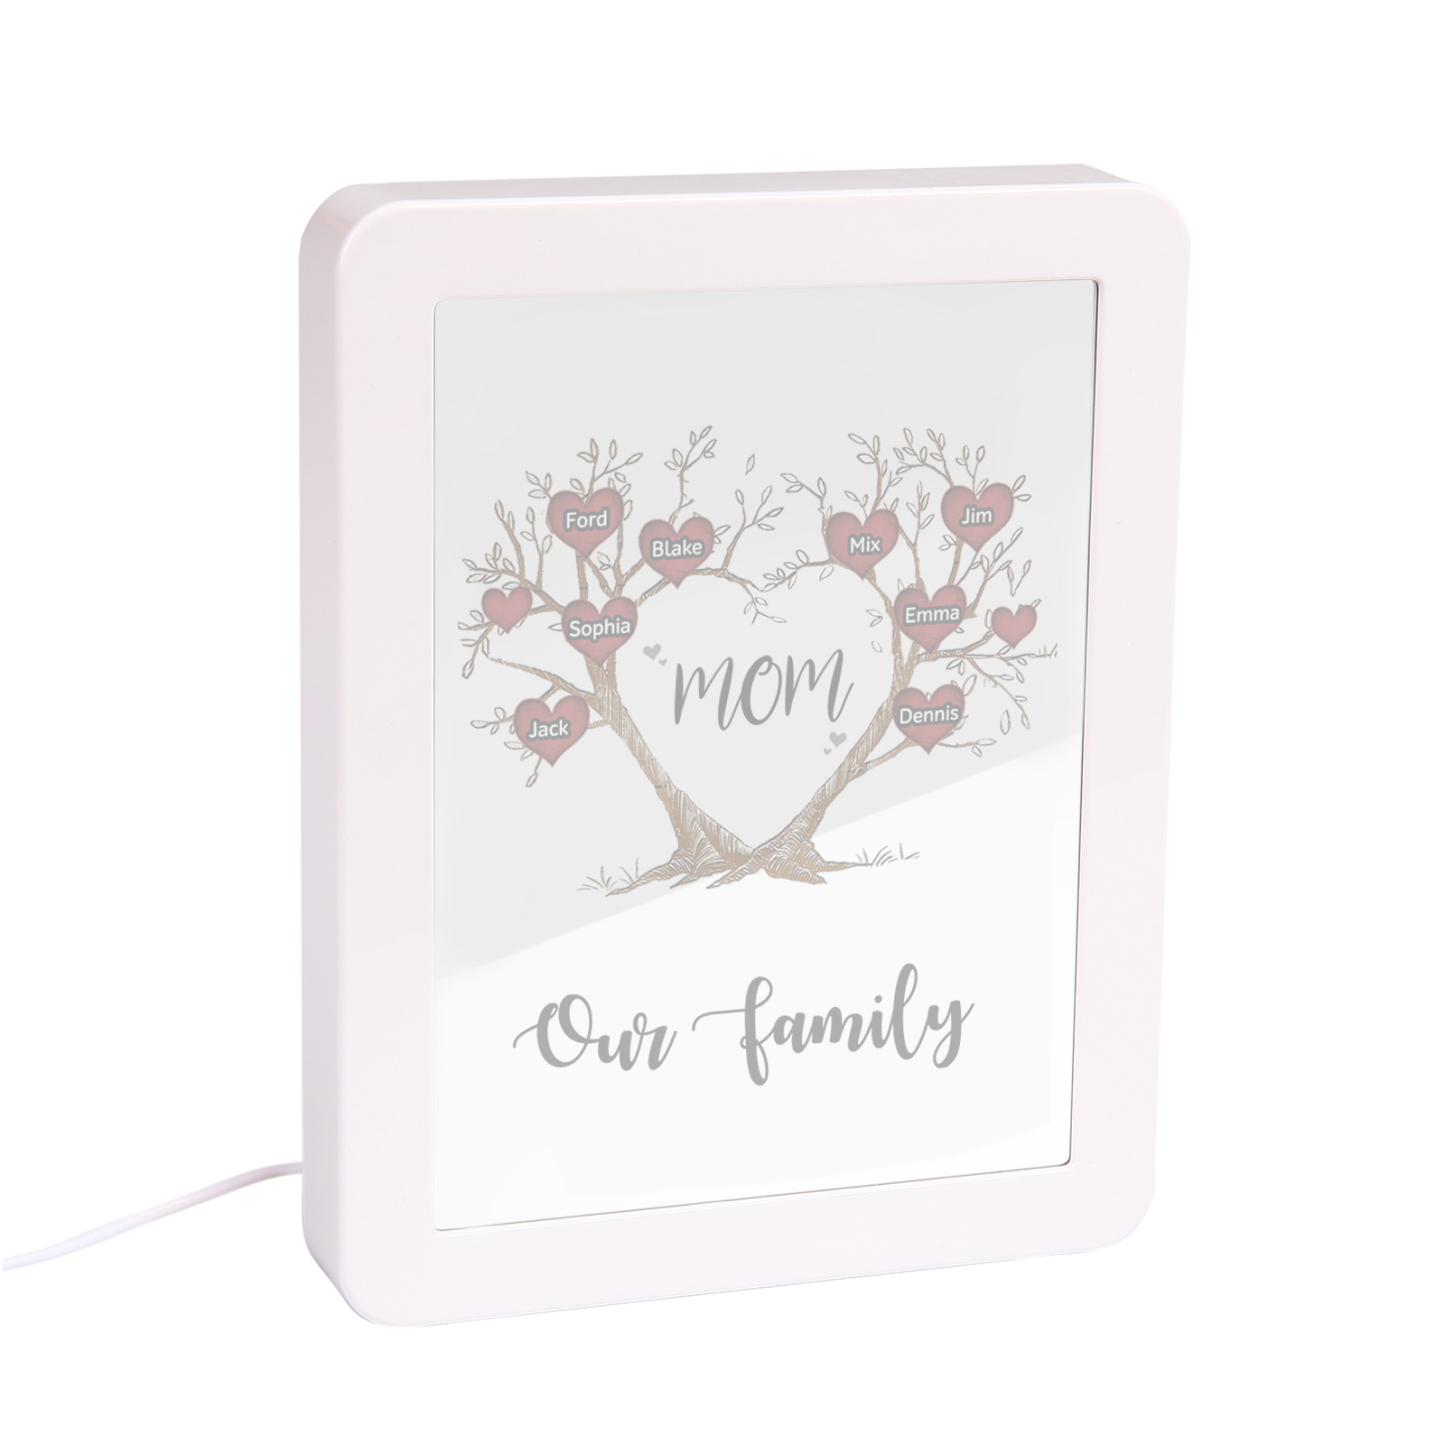 8 Names - Personalized Home Mirror Photo Frame Night Light Insert/Rechargeable Custom Text LED Night Light Gift for Mom